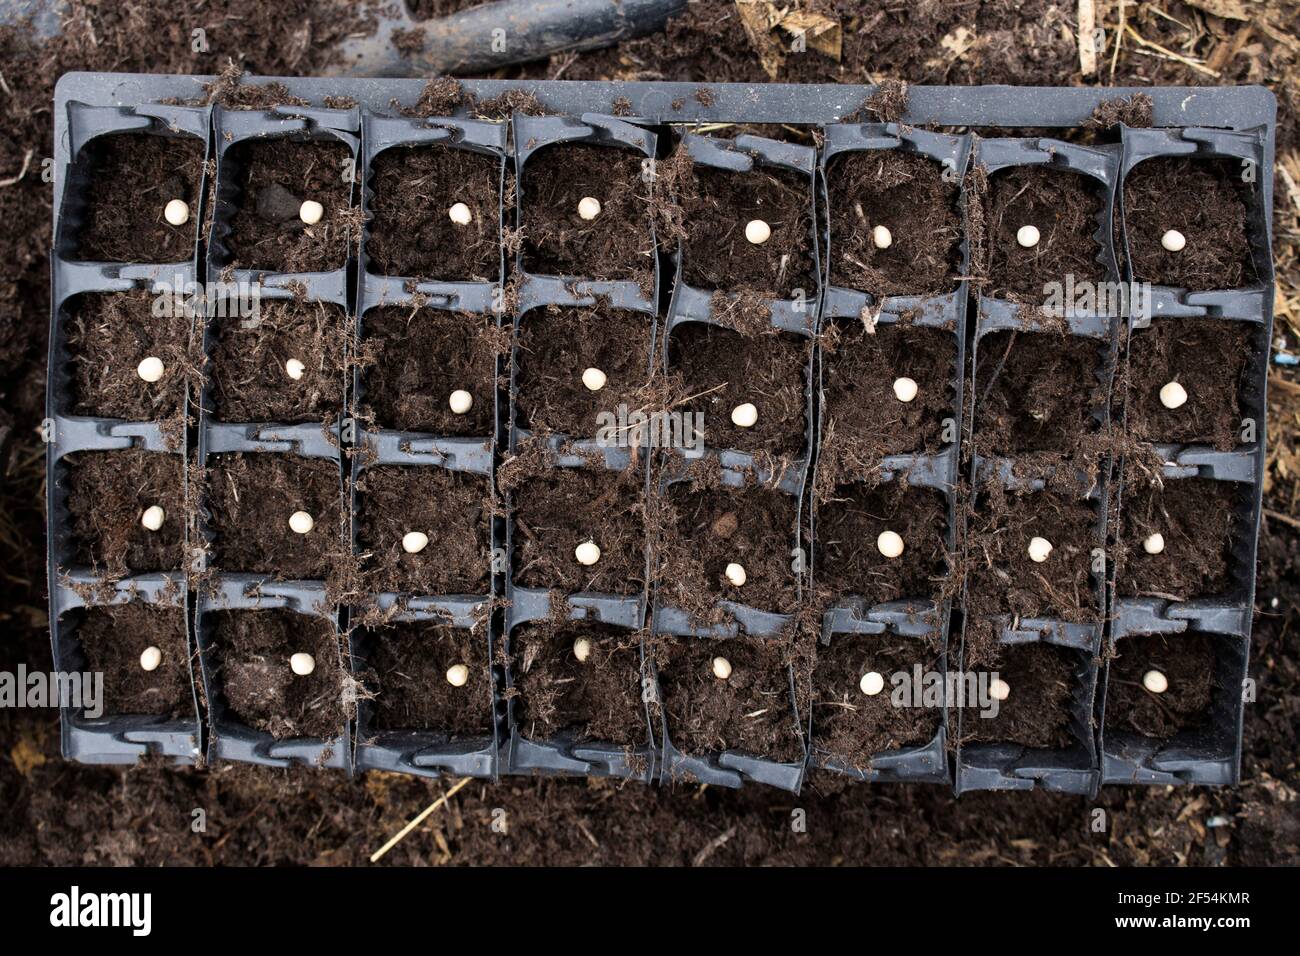 Rootrainers filled with sweet pea seeds that have just been sown Stock Photo